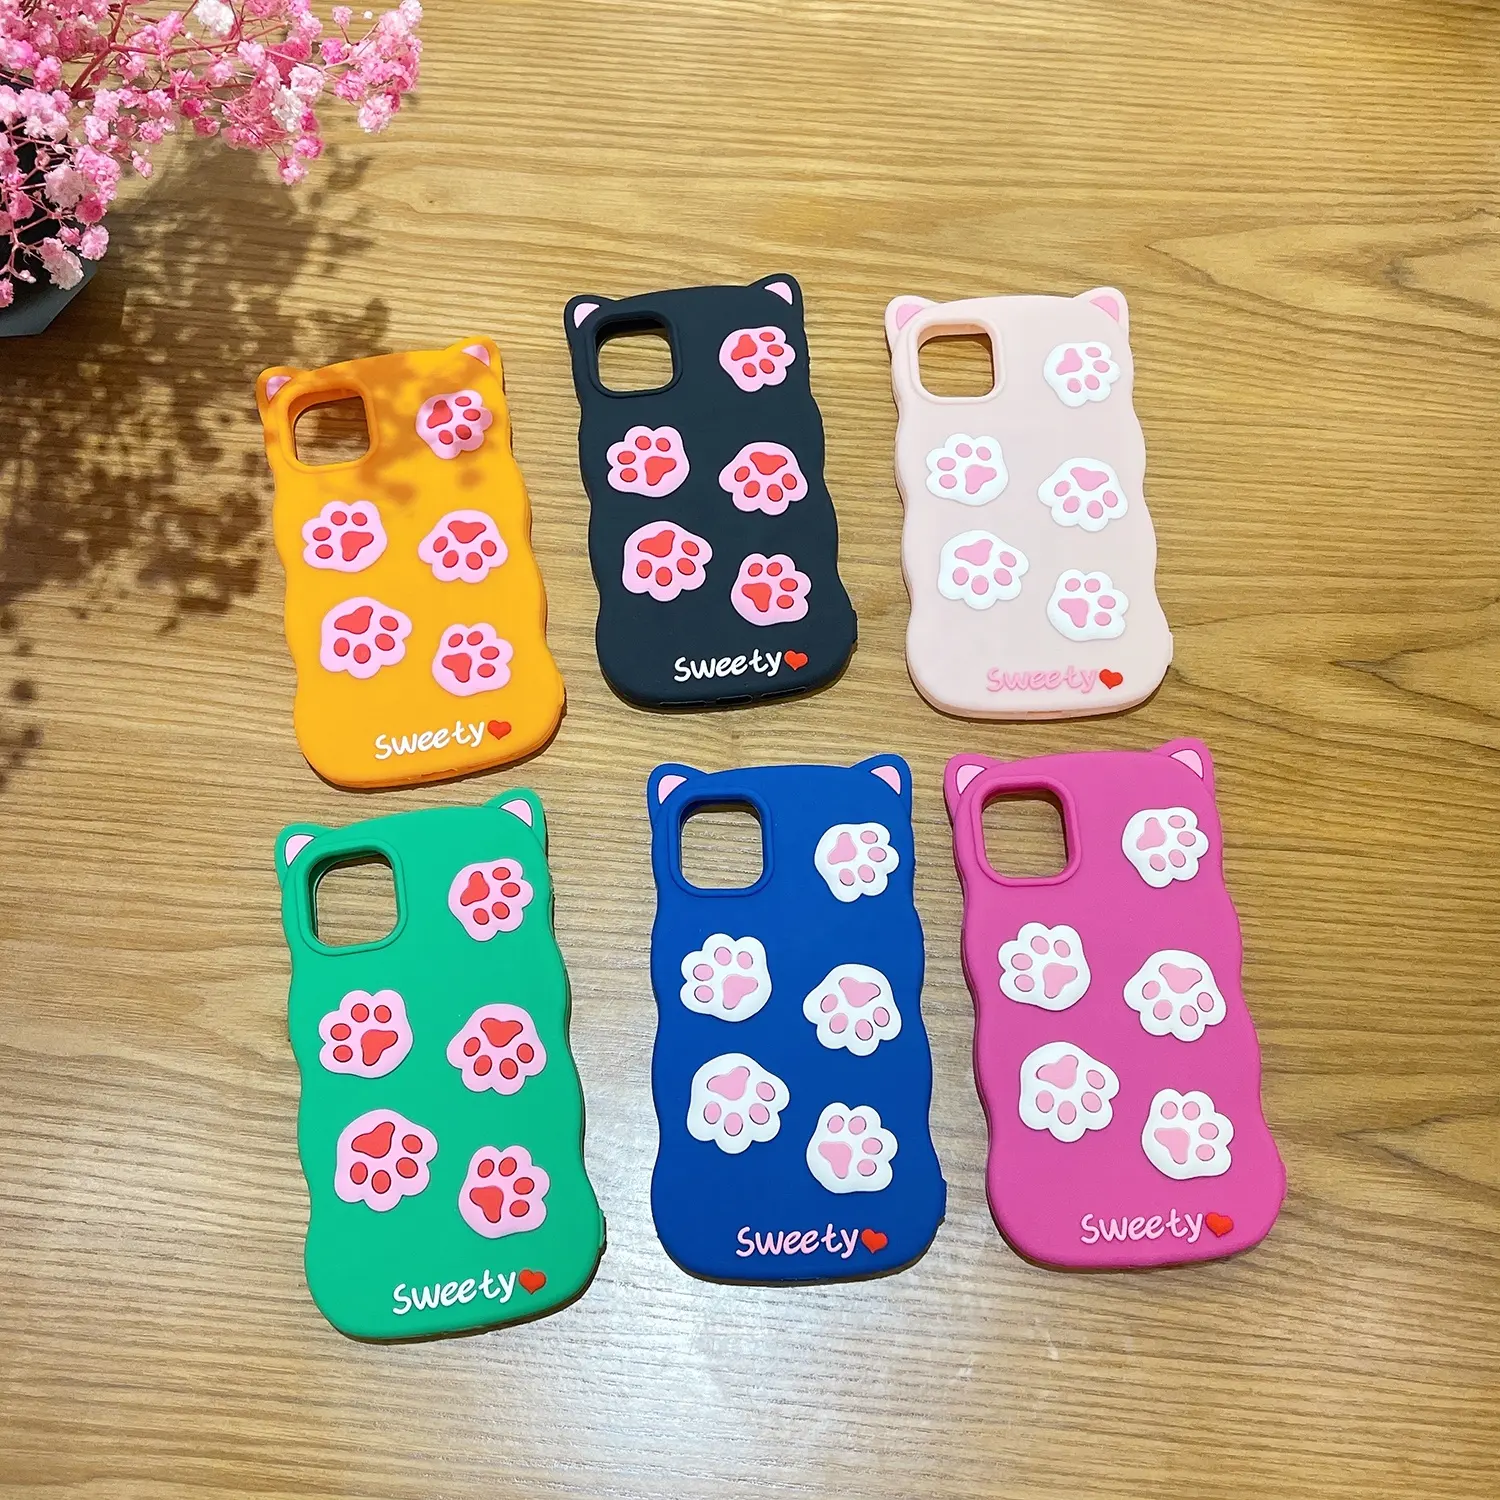 Fashionable Design Soft SIlicone Case For iPhone 11 12 13 PRO MAX 3D Cartoon Silicone Phone Case With 3D Cat Paw